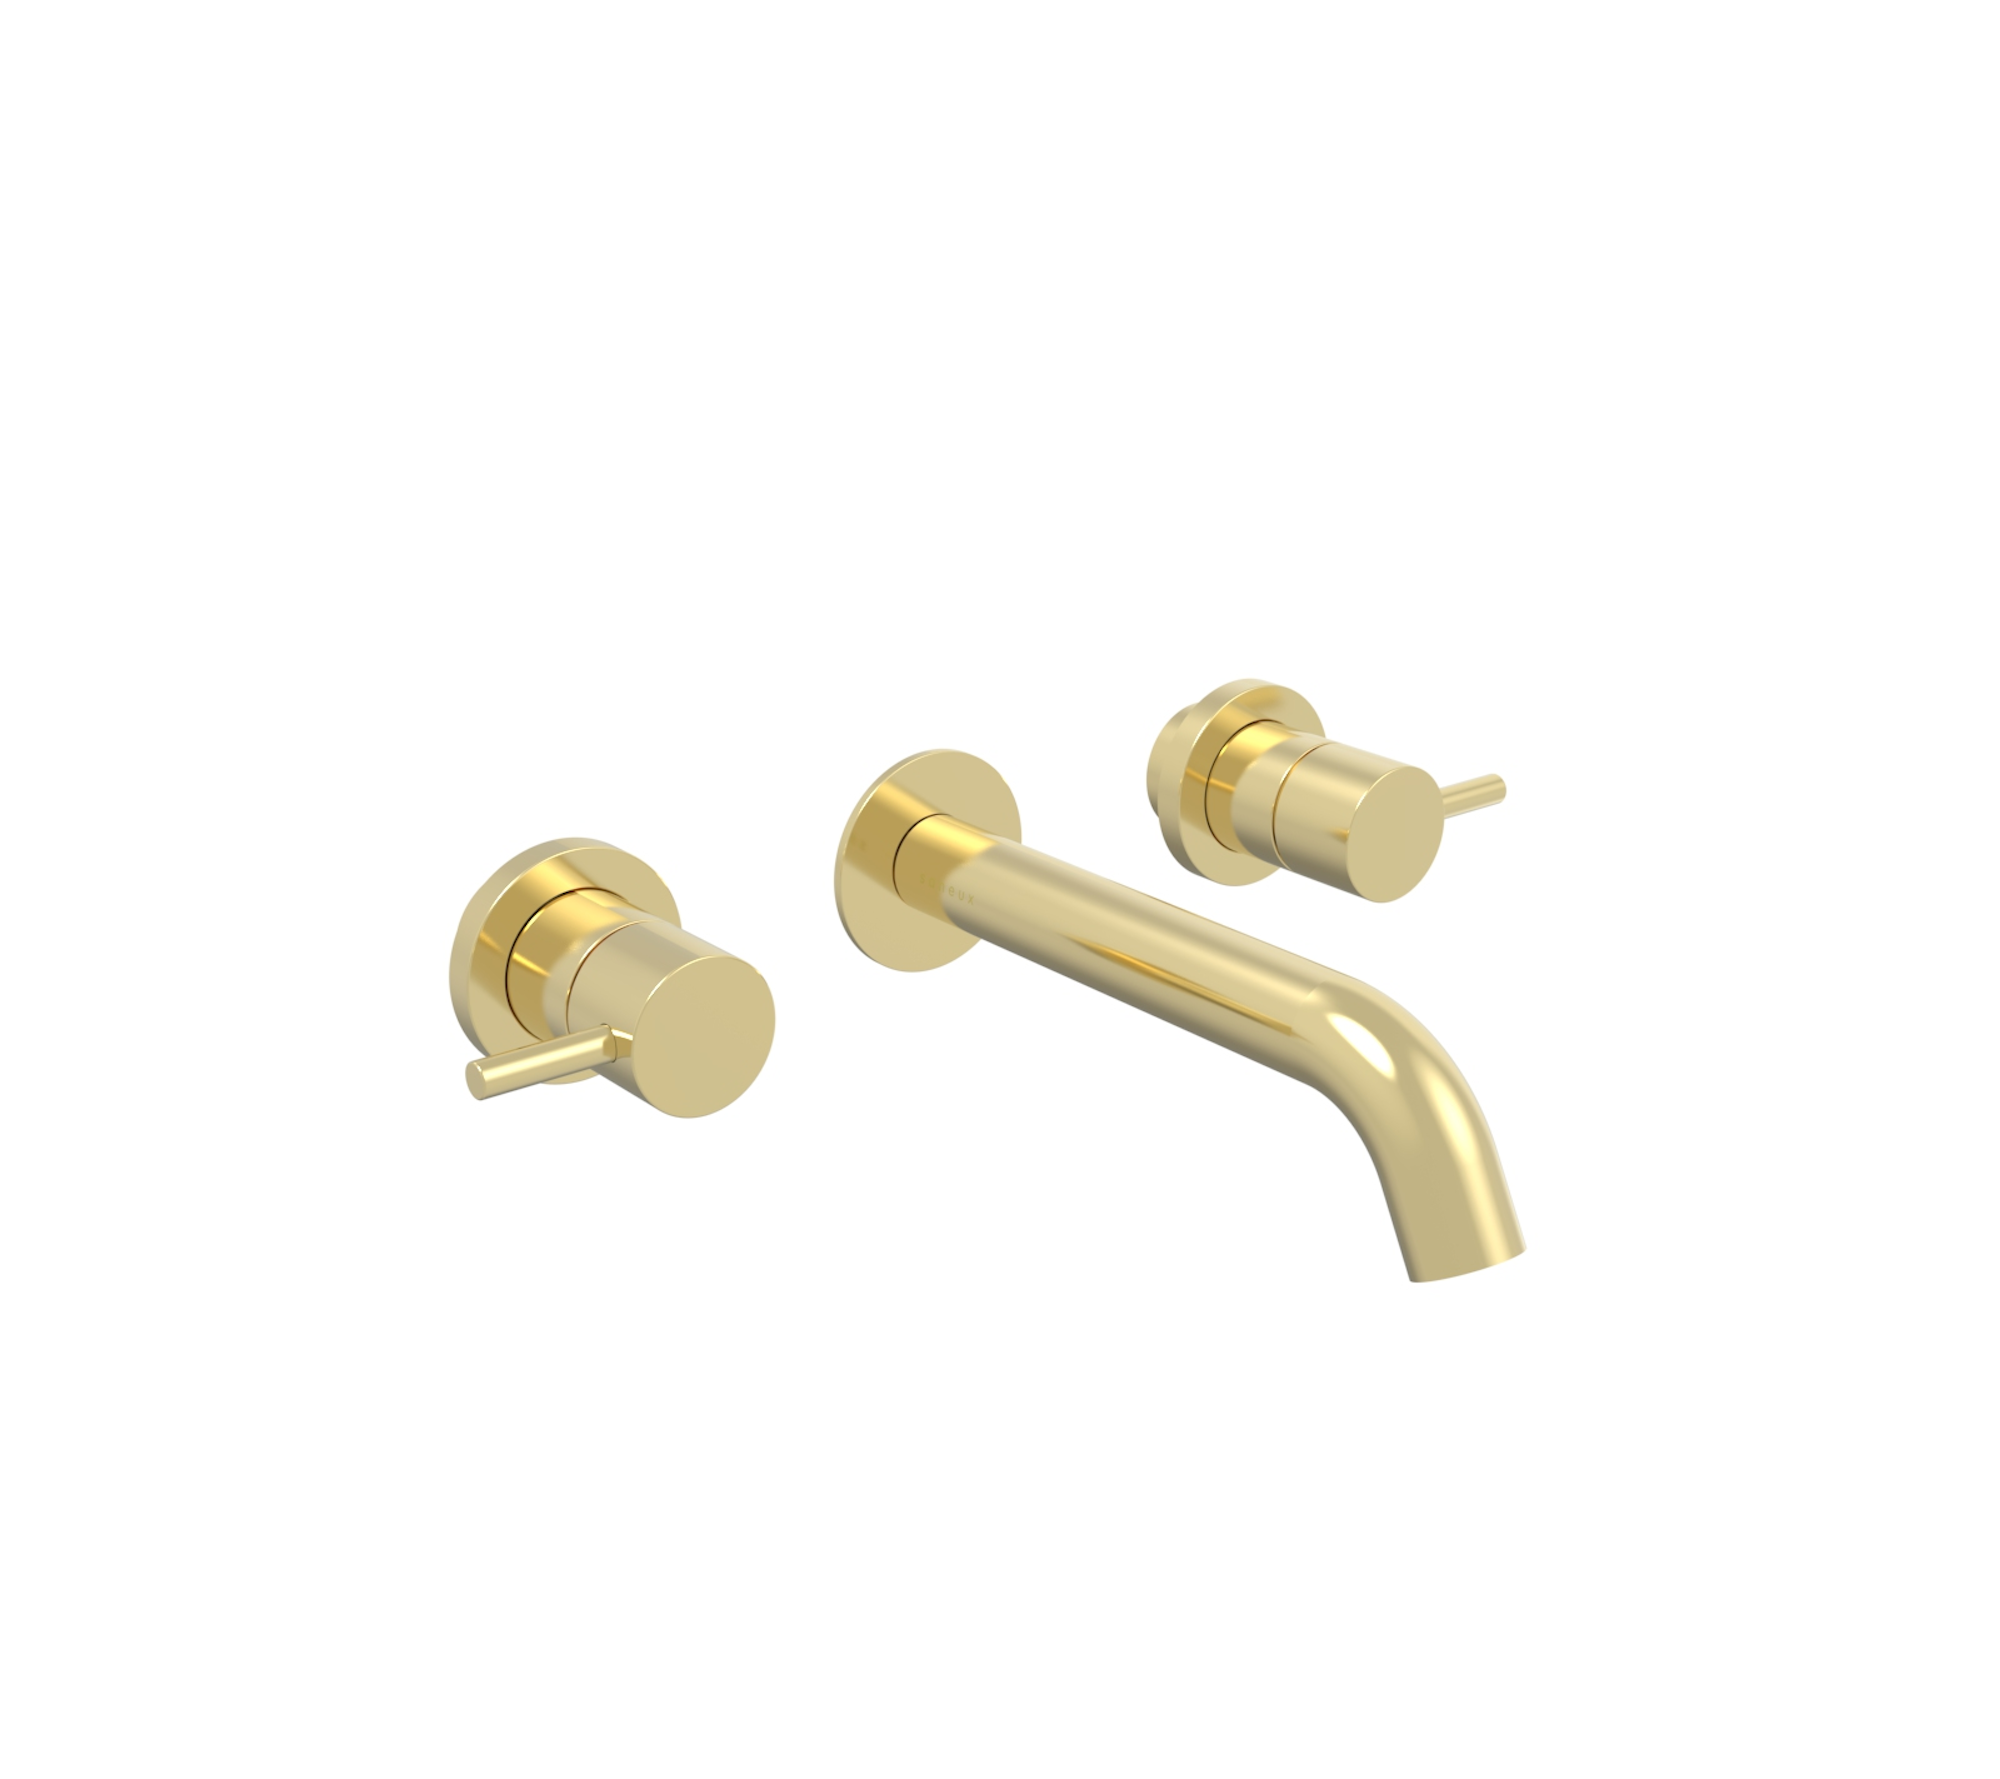 COS 3 piece wall mounted basin mixer - Brushed Brass